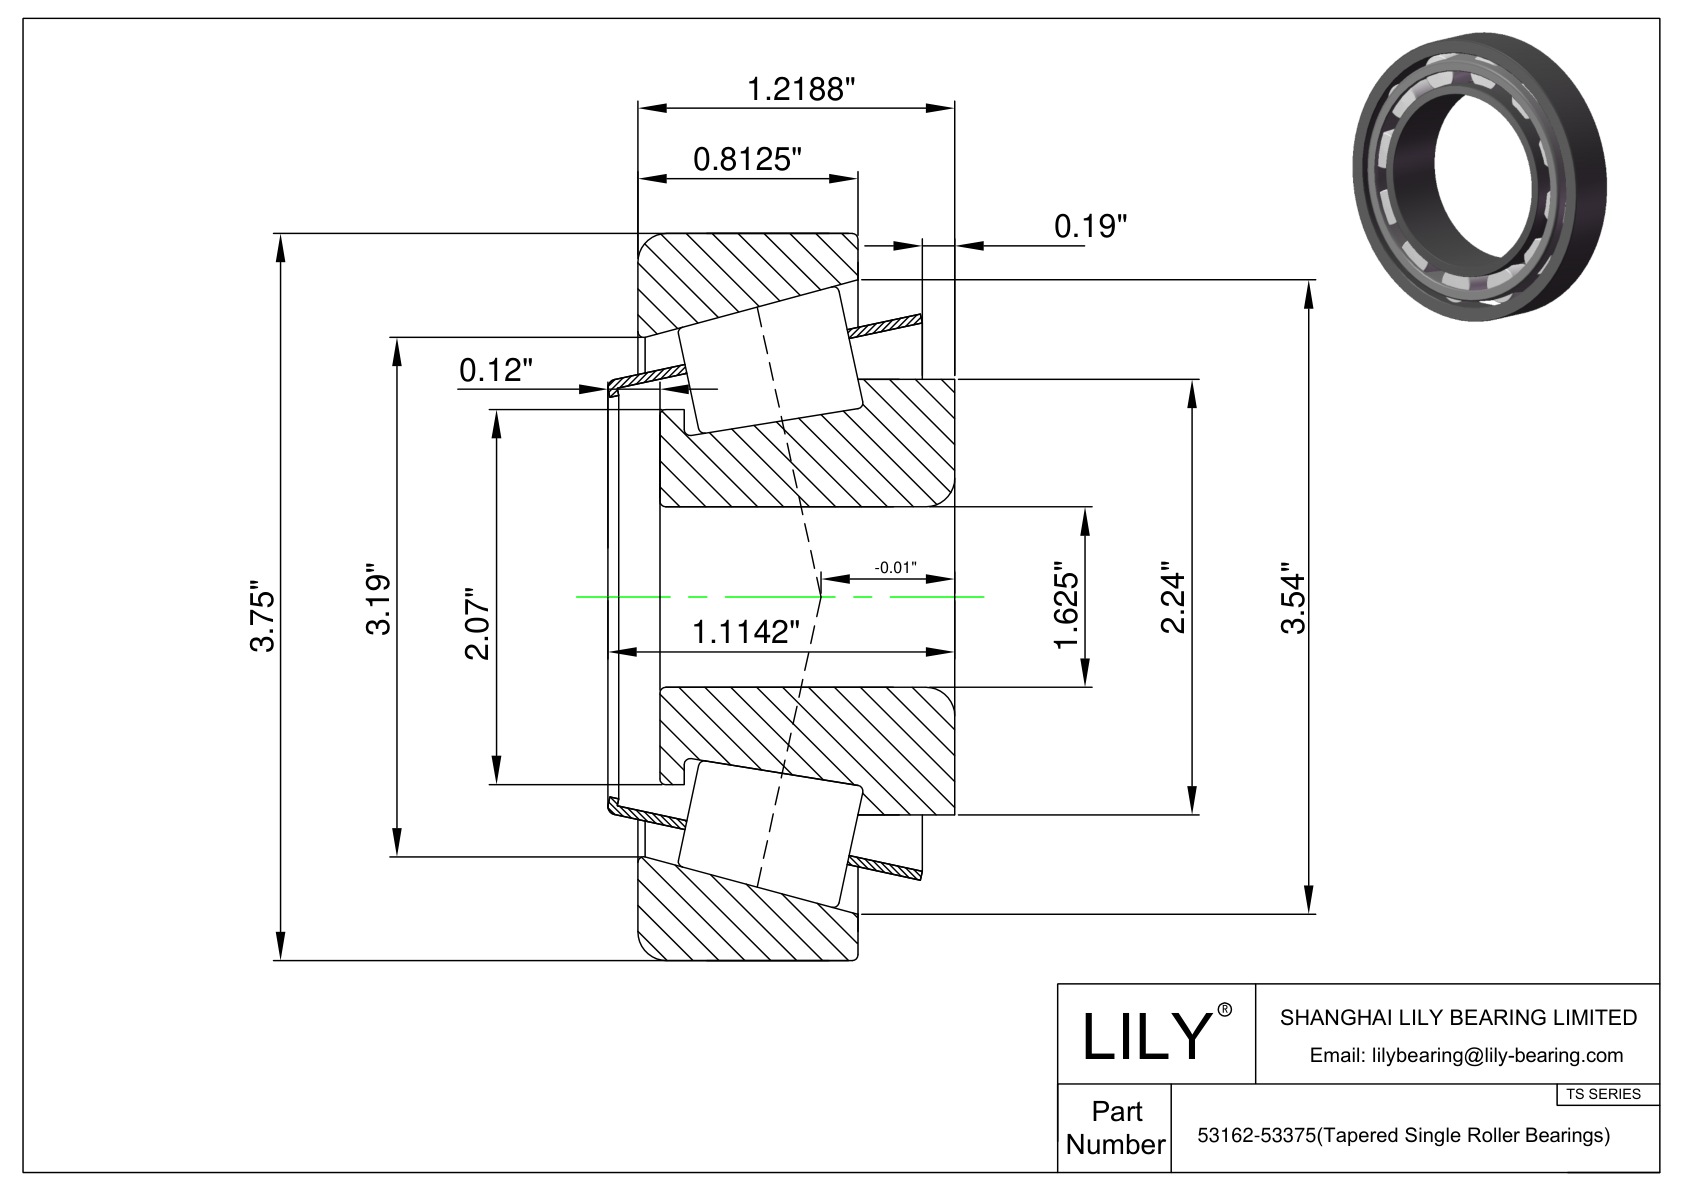 53162-53375 TS (Tapered Single Roller Bearings) (Imperial) cad drawing